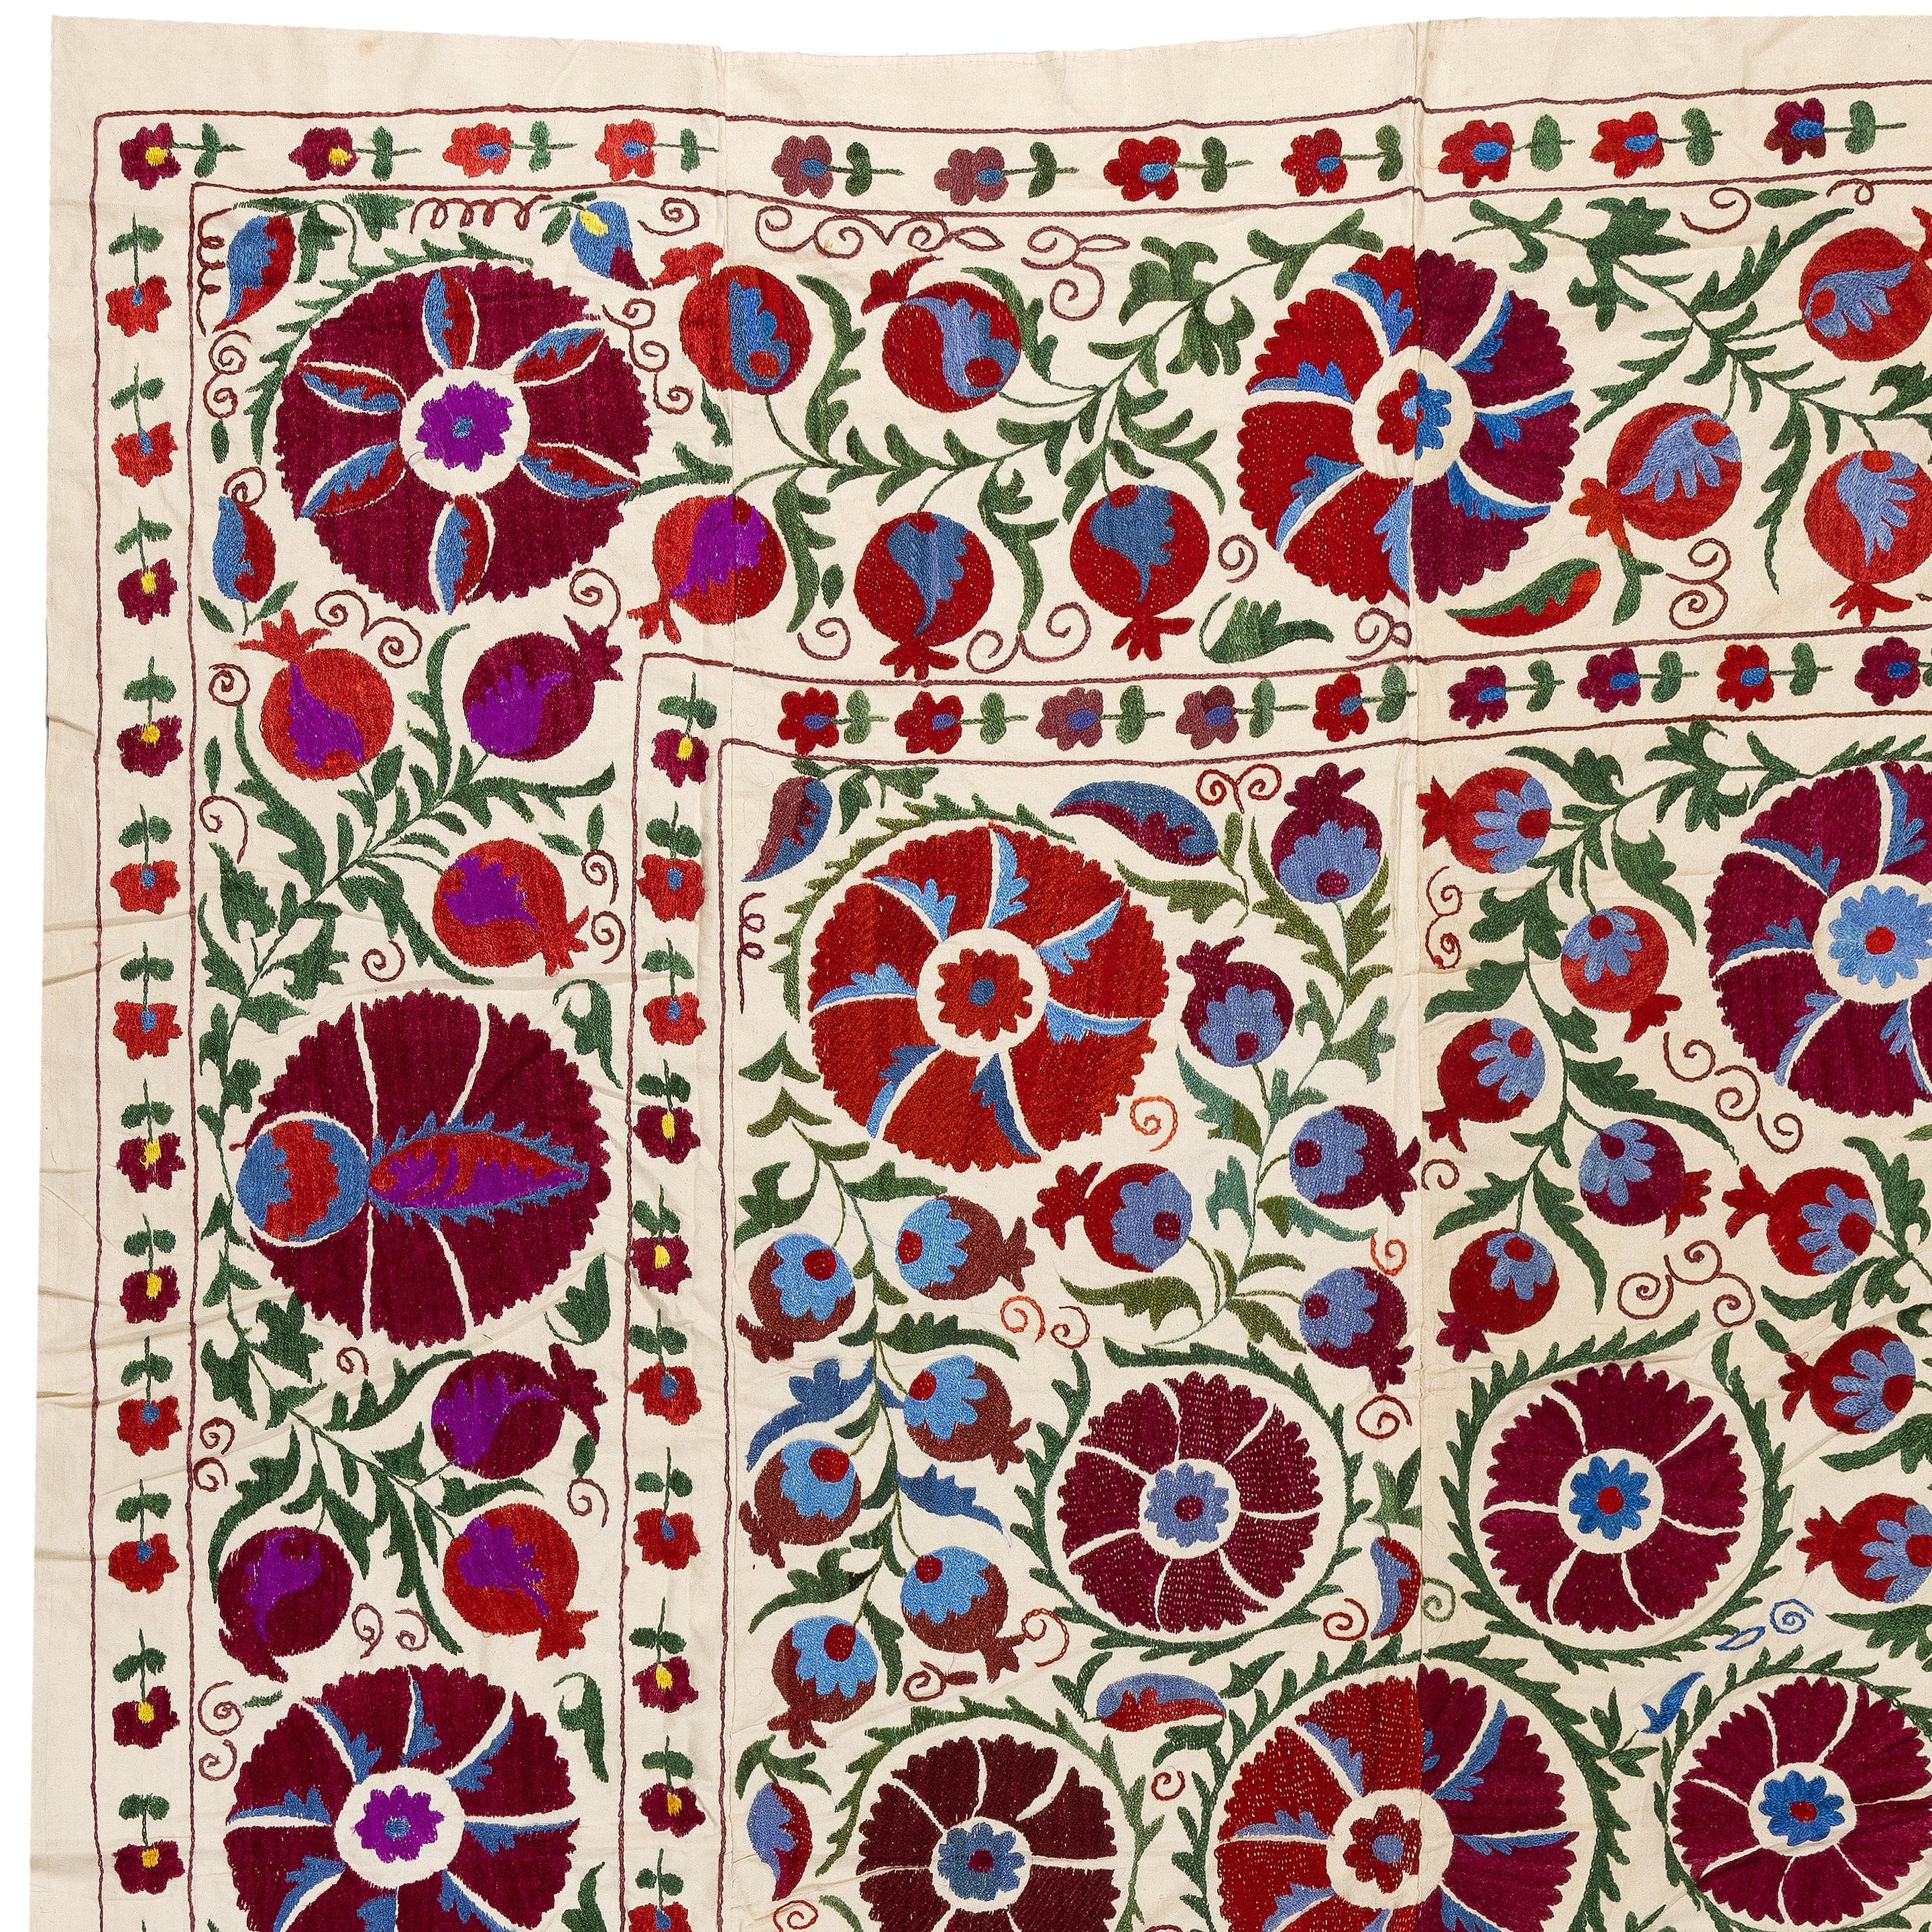 Uzbek 6.2x7.8 Ft Embroidered Bedspread, Suzani Wall Hanging, Needlework Table Cover For Sale